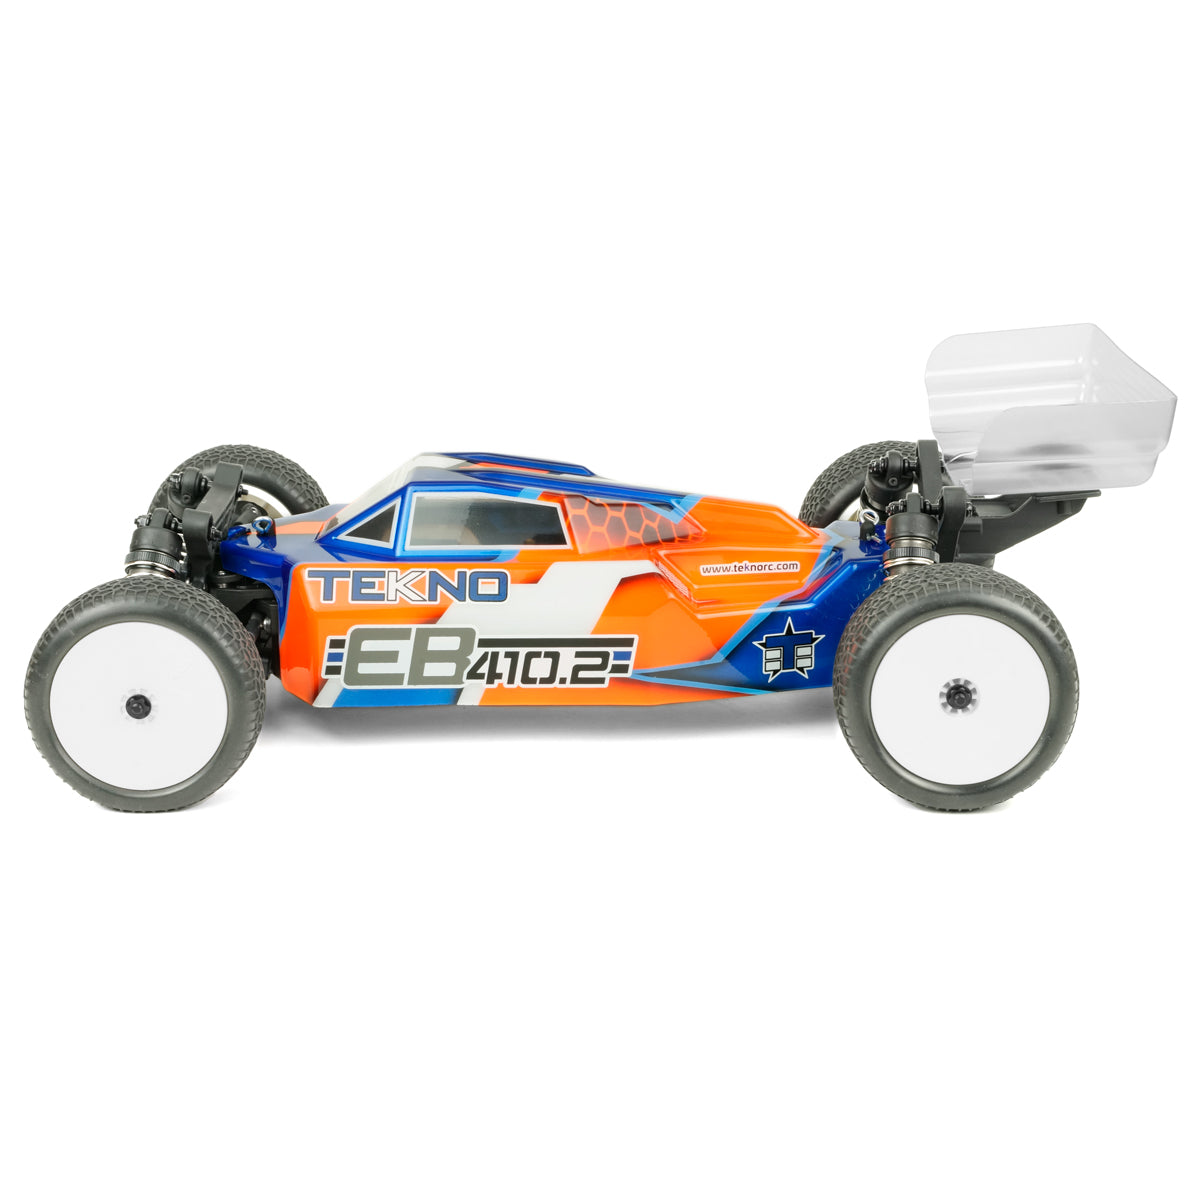 NEW EB410.2 1/10th 4WD Competition Electric Buggy Kit